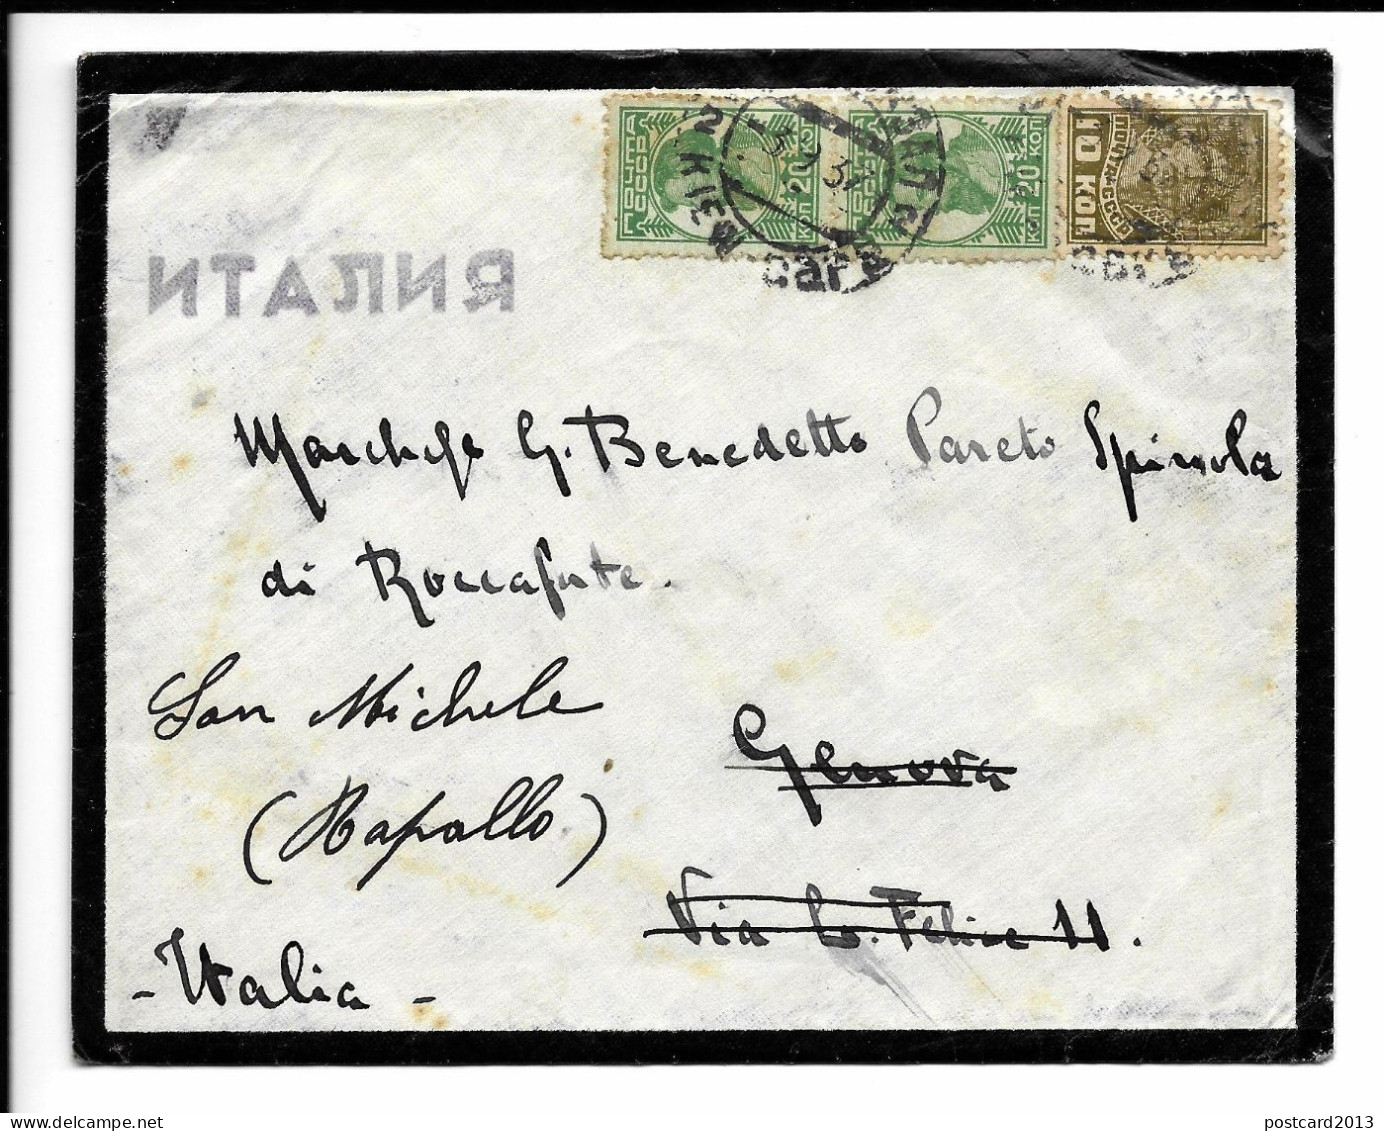 RUSSIA, LETTER FROM THE ITALIAN CONSULATE OF KIEV TO SAN MICHELE (RAPALLO - GENOA - ITALY), 1937. - Covers & Documents